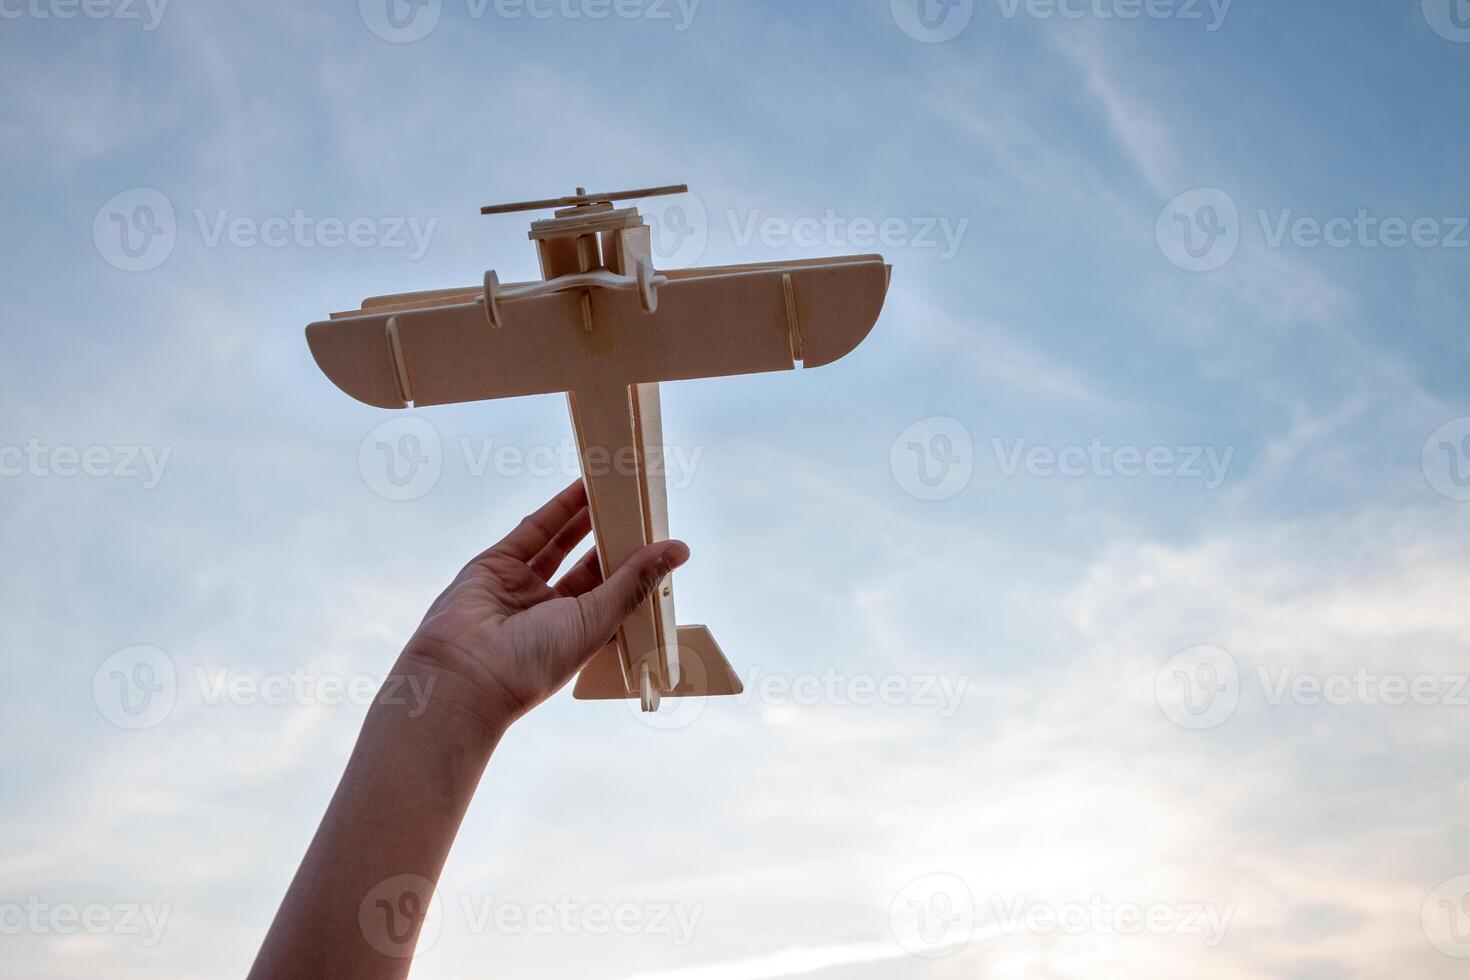 Child Holding a Wooden Airplane Model High in the Sky photo